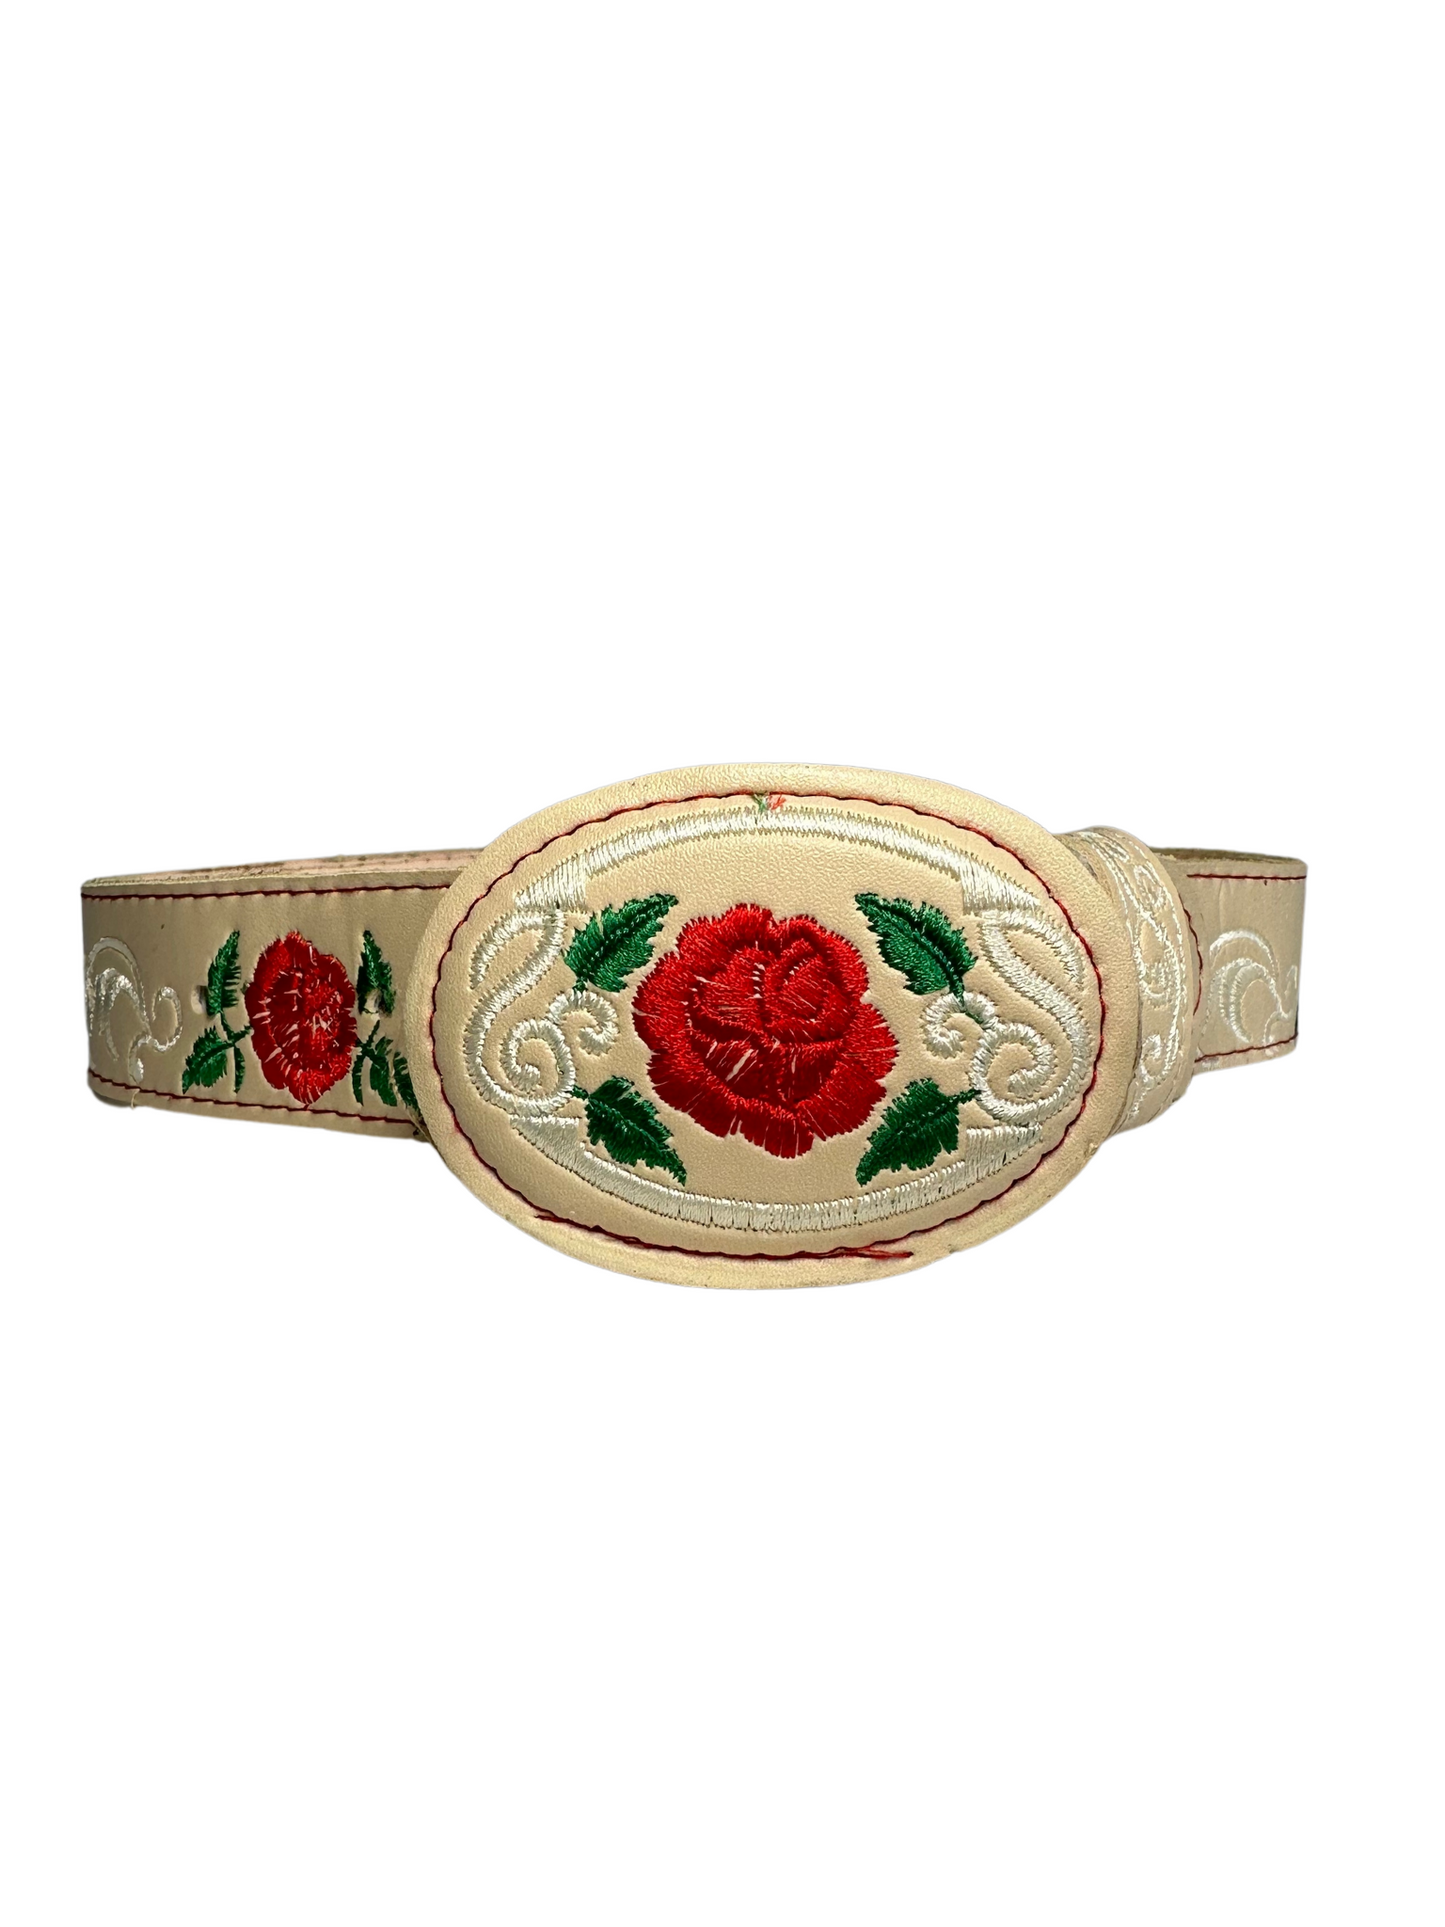 Girl's Red Rose Embroided Leather Belt